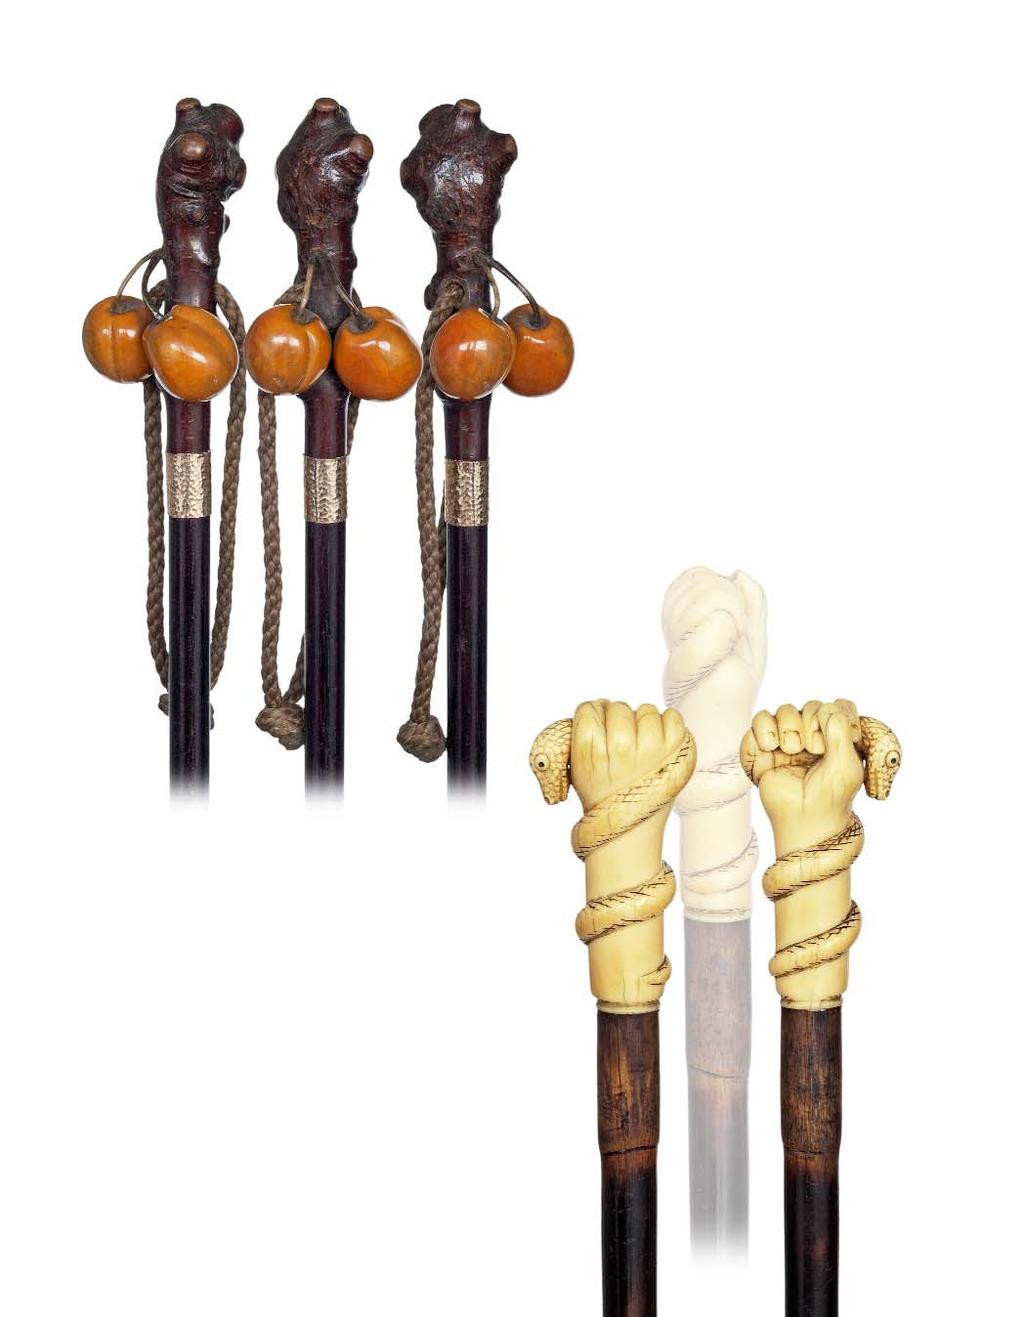 121. Countryside cane French, late 19th Century- Fruit wood branch handle with two attached and substantial hardstone apricots, braided loop, ebony shaft with silver gilt collar and a metal ferrule.